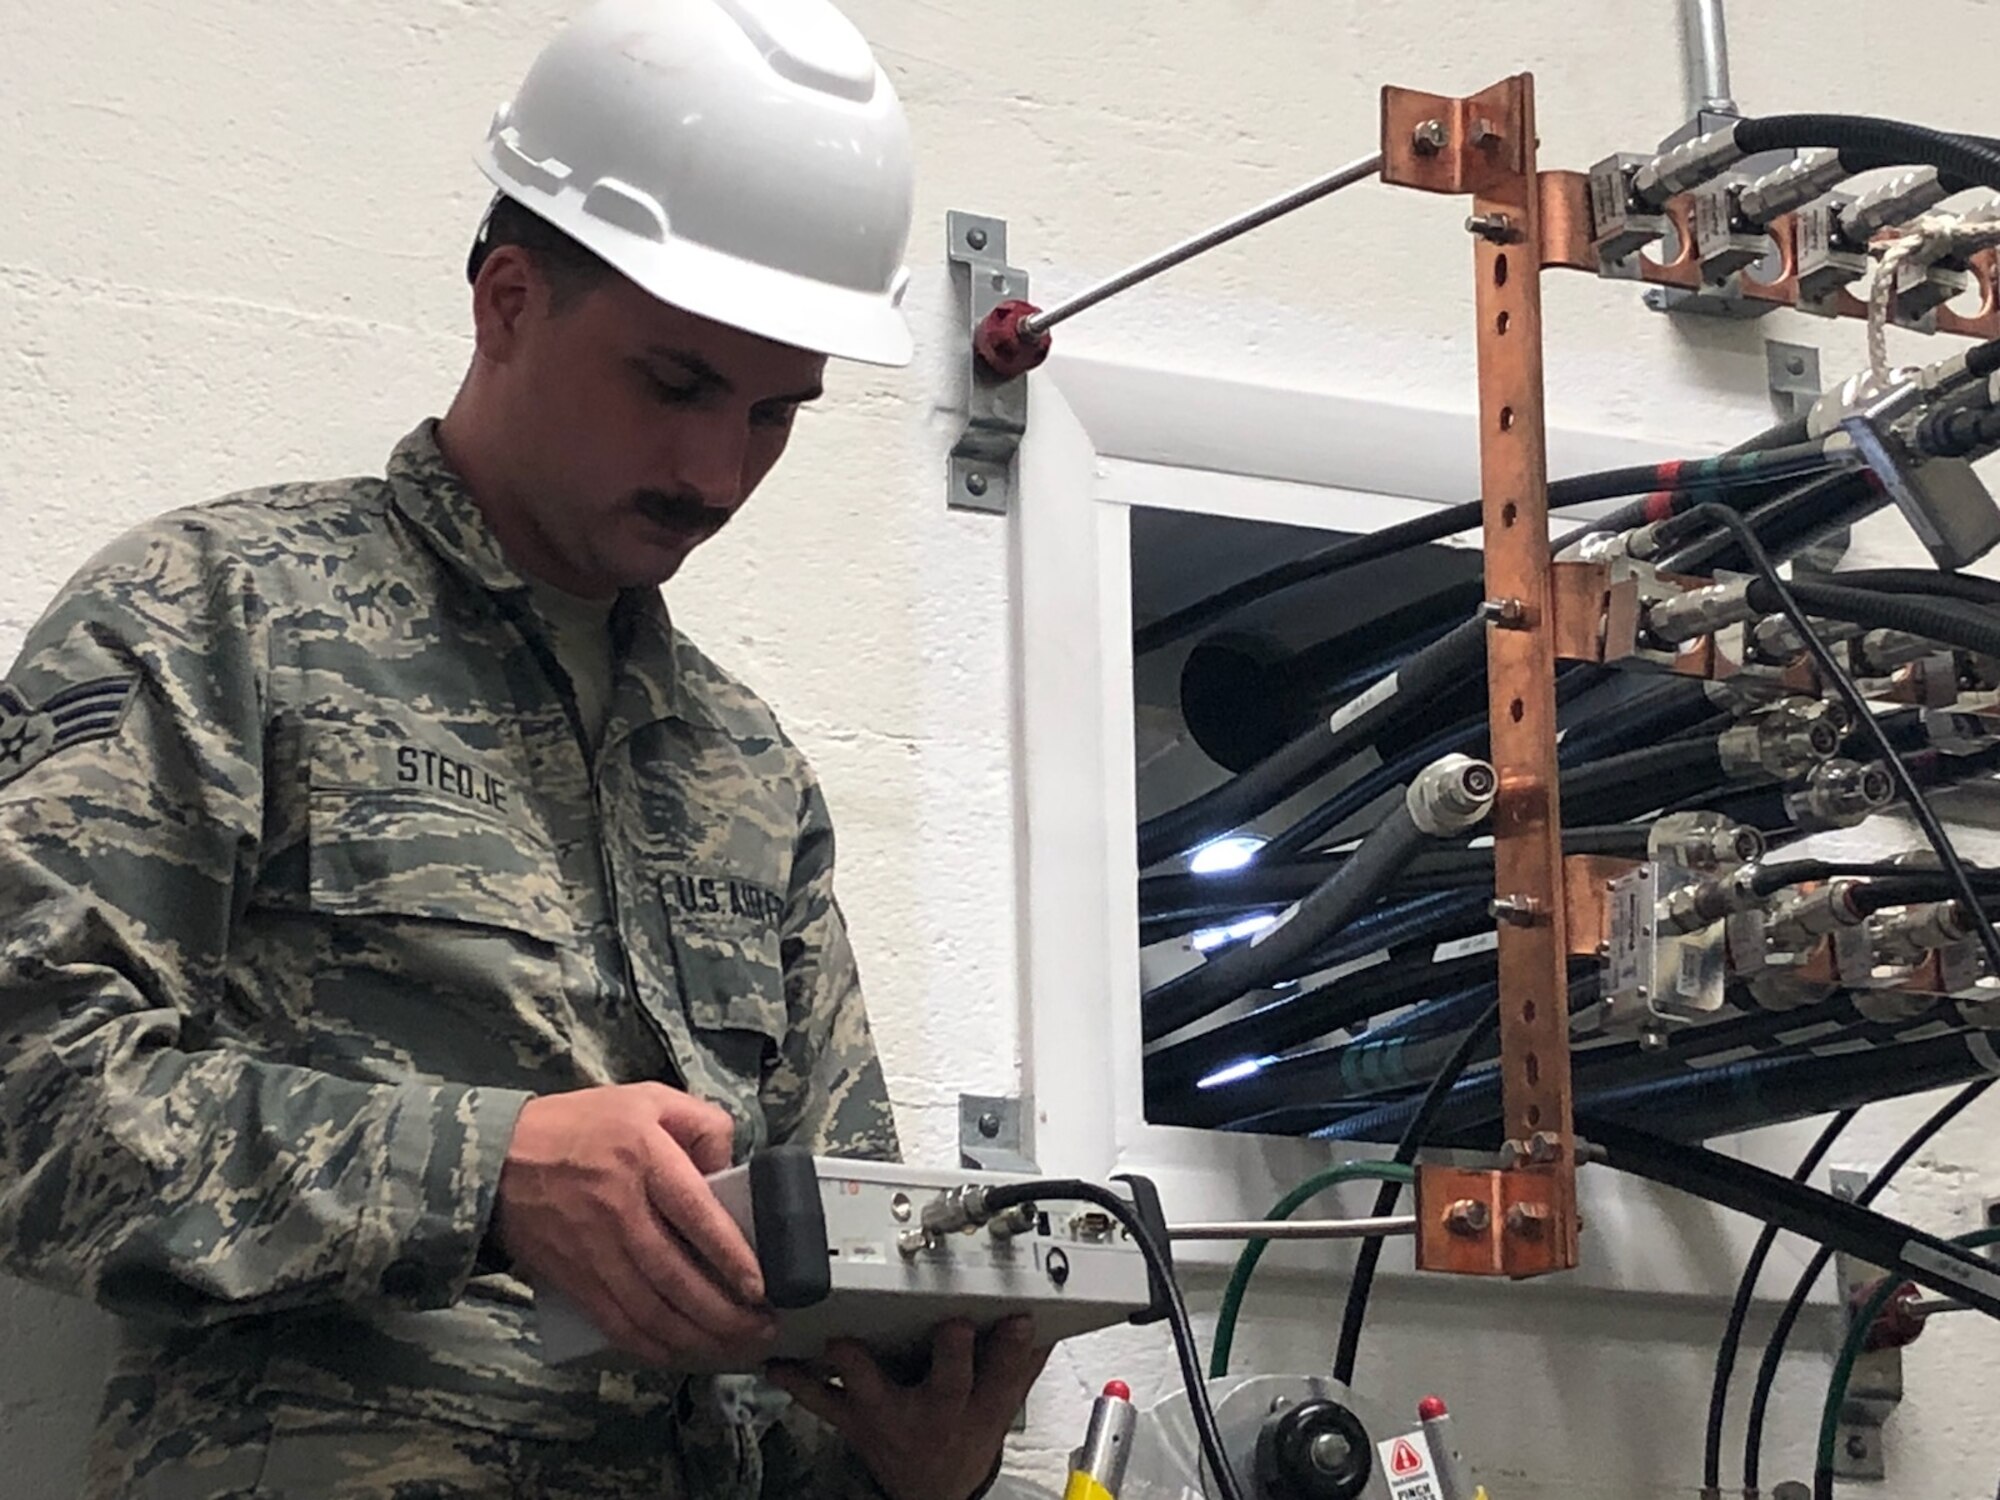 U.S. Air Force Senior Airman Shane Stedje, 210th Engineering Installation Squadron, tests a voltage standing wave ratio at Tyndall Air Force Base, Nov. 30, 2018.